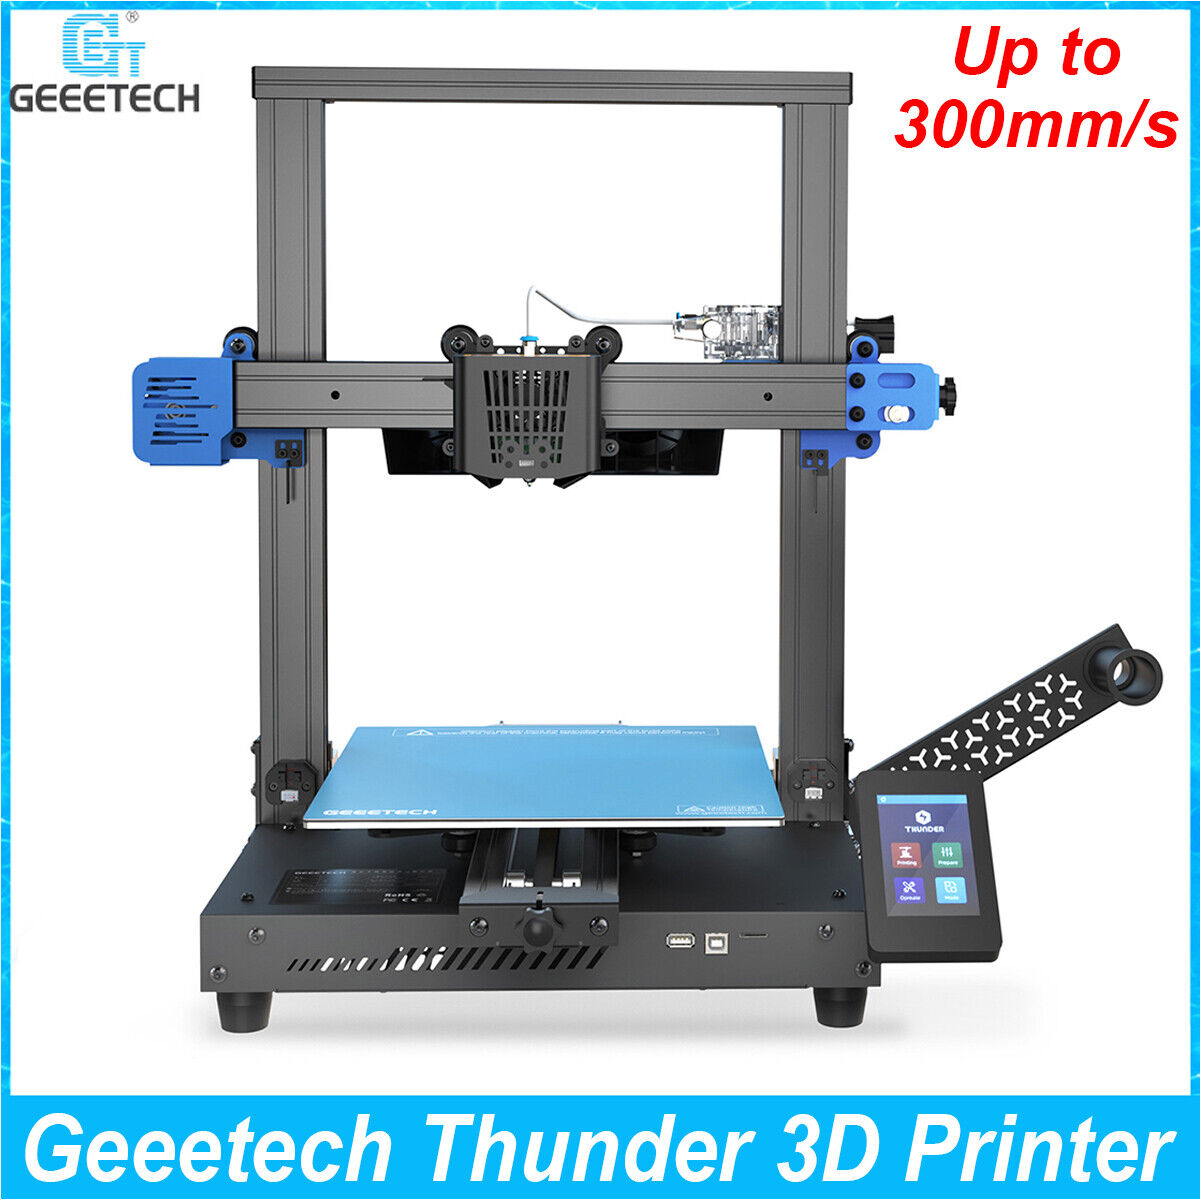 Geeetech Thunder 3D Printer 300mm/s High Speed Fast Printing w/ Auto-Leveling